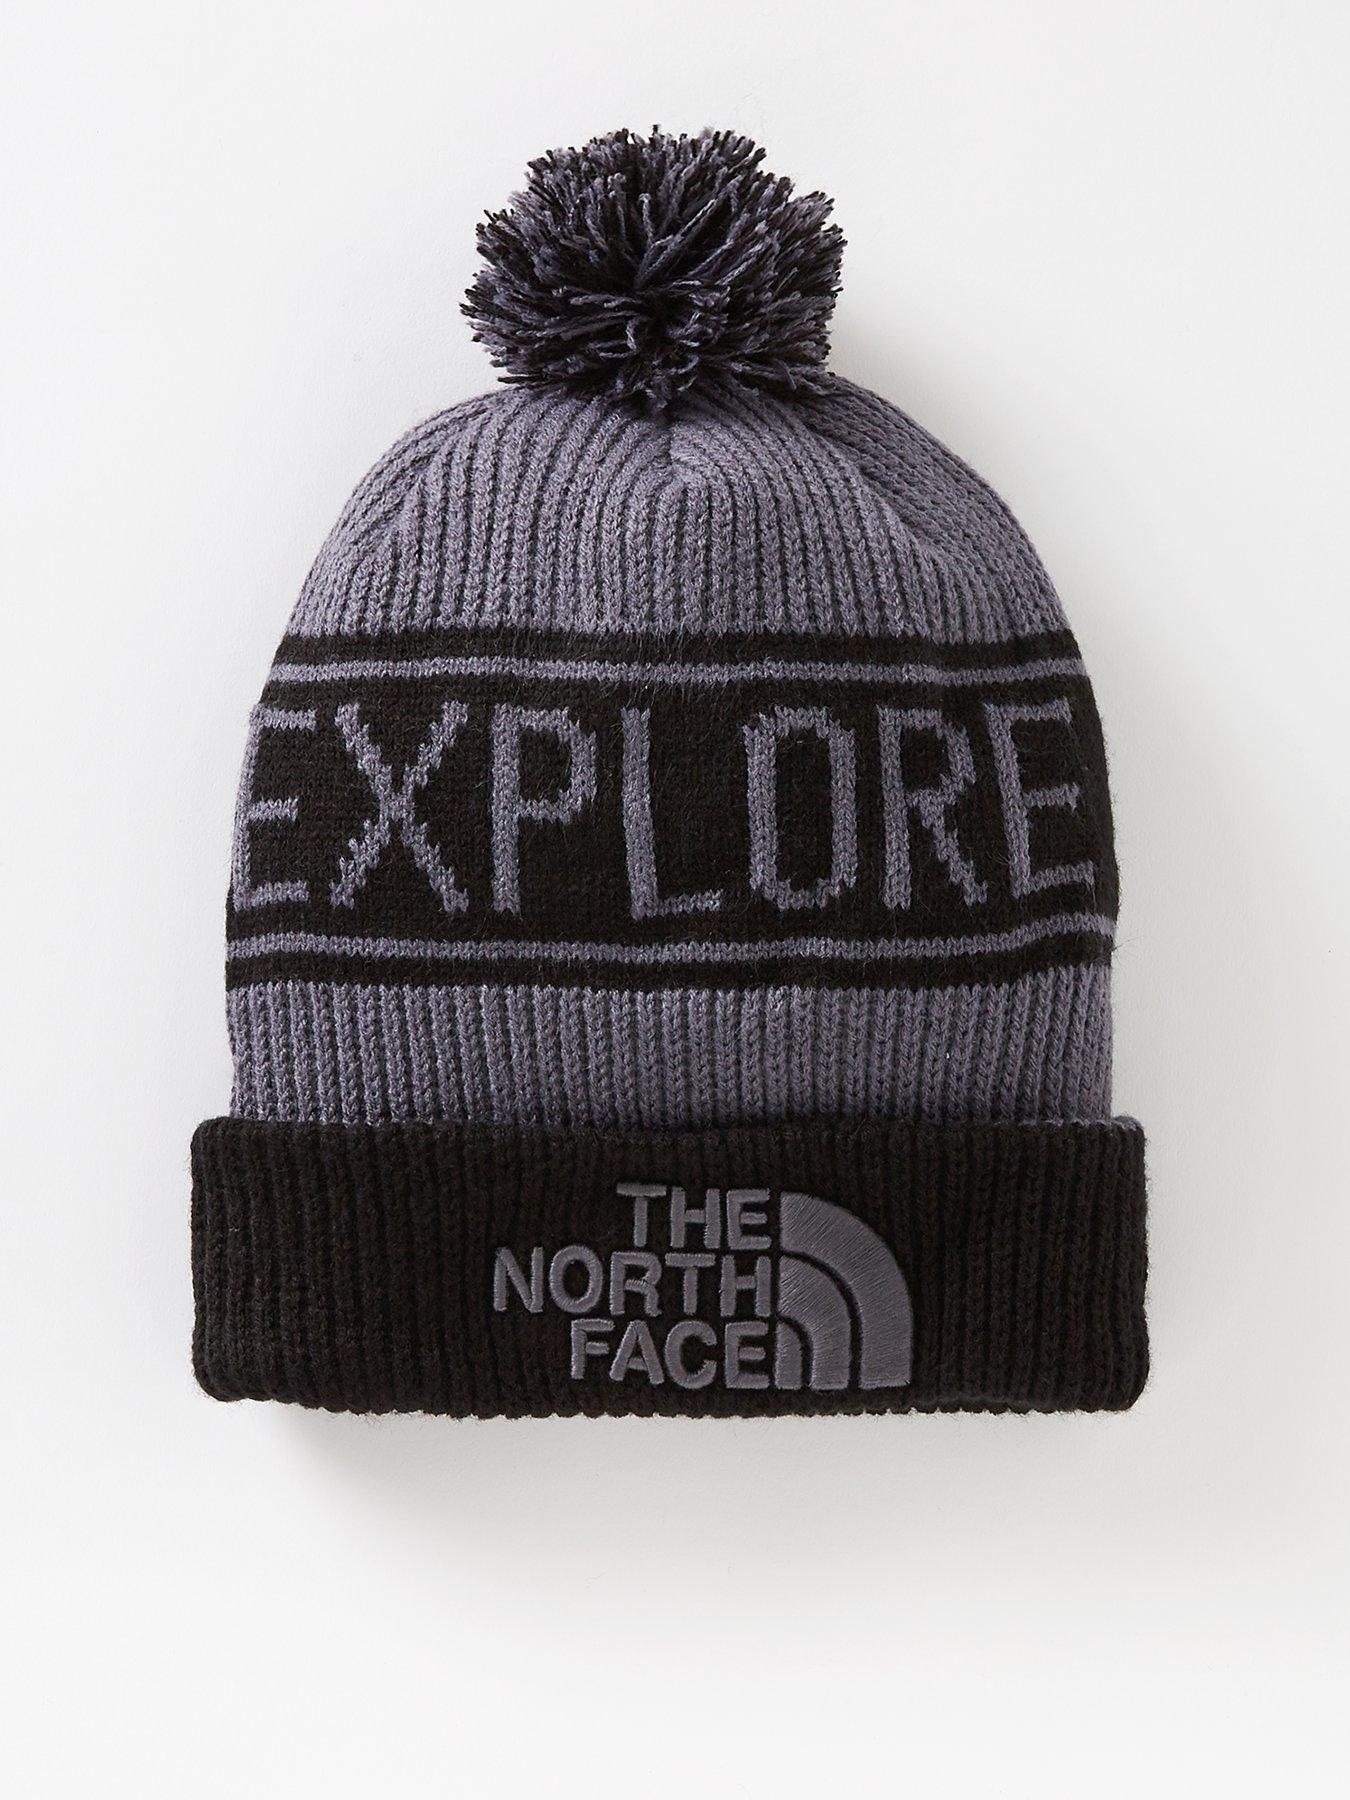 THE NORTH FACE Recycled 66 Brimmer Hat - Olive